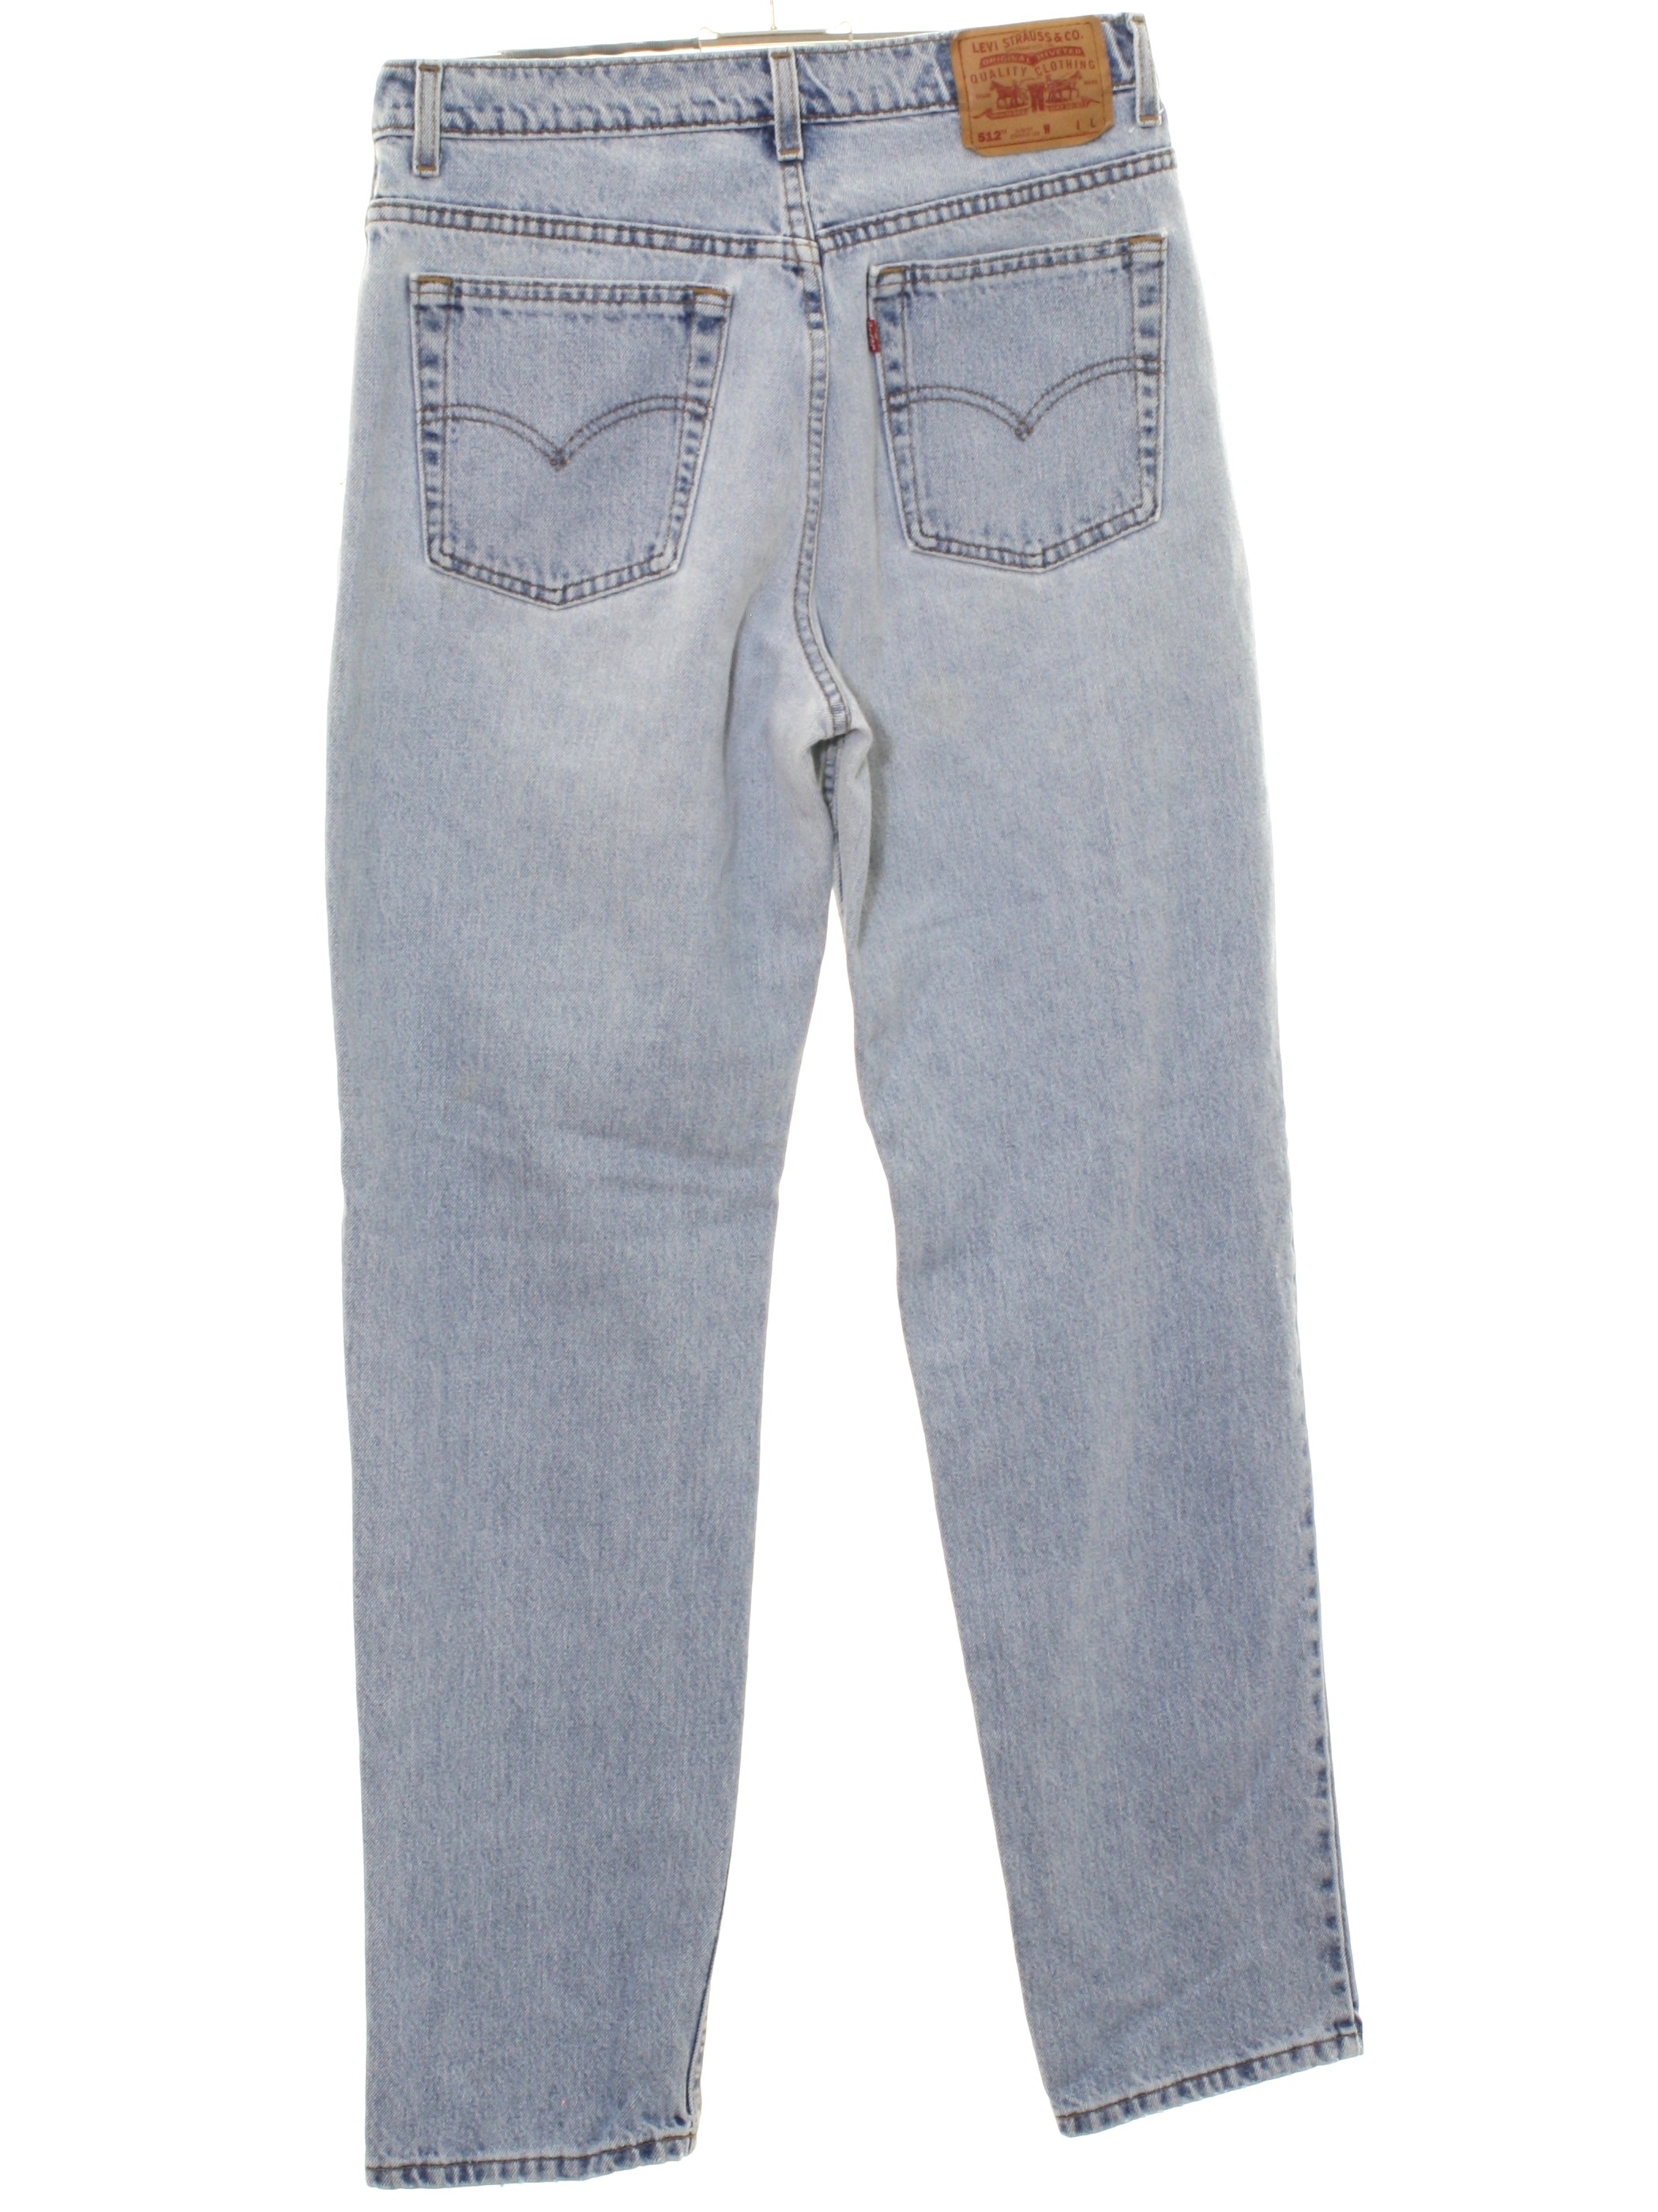 Levis 521 80's Vintage Pants: Late 80s or early 90s -Levis 521- Womens ...